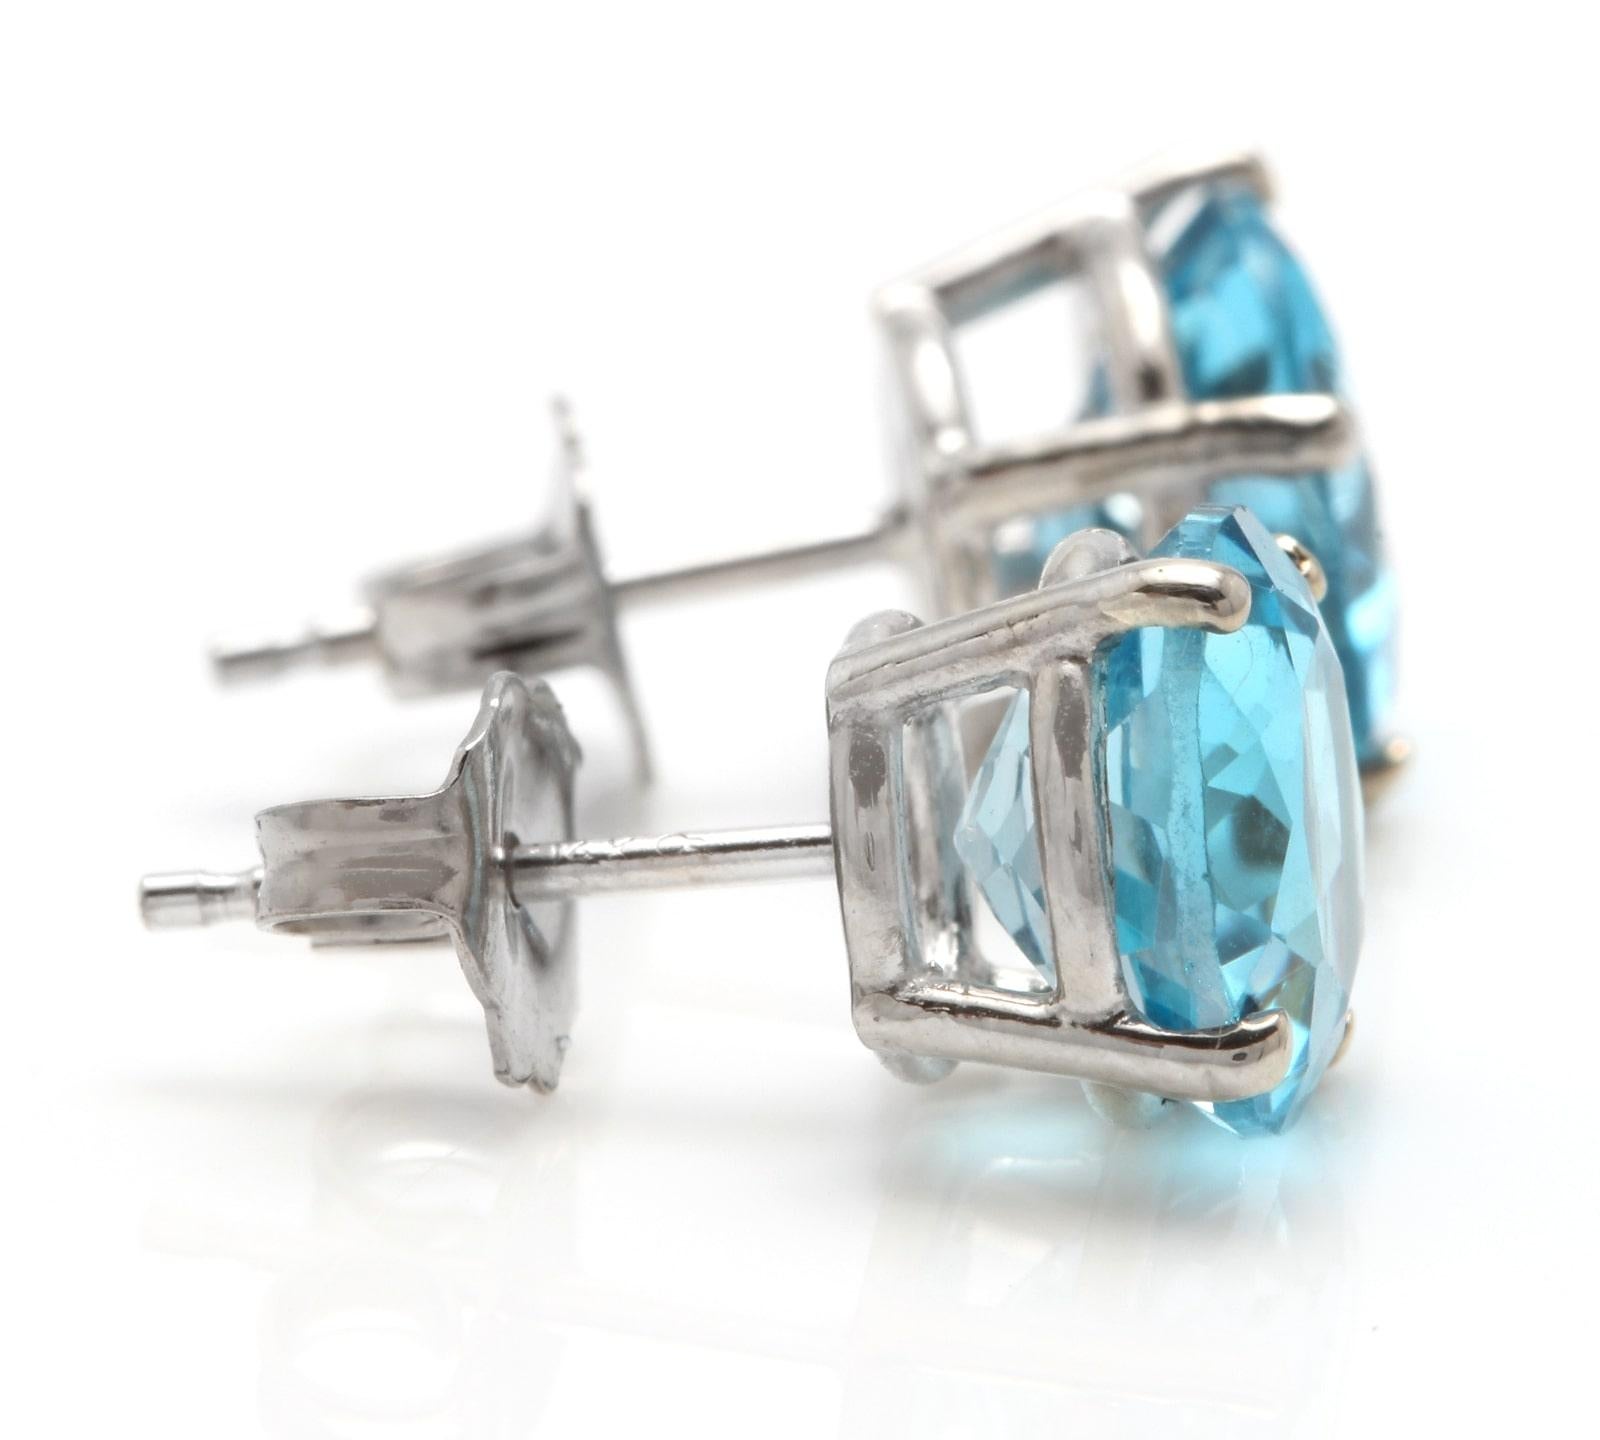 Exquisite Top Quality 4.50 Carats Natural Swiss Blue Topaz 14K Solid White Gold Stud Earrings

Amazing looking piece!

Total Natural Round Cut Swiss Blue Topaz Weight: 4.50 Carats (both earrings)

Topaz Treatment: Heating, Irradiation

Swiss Blue